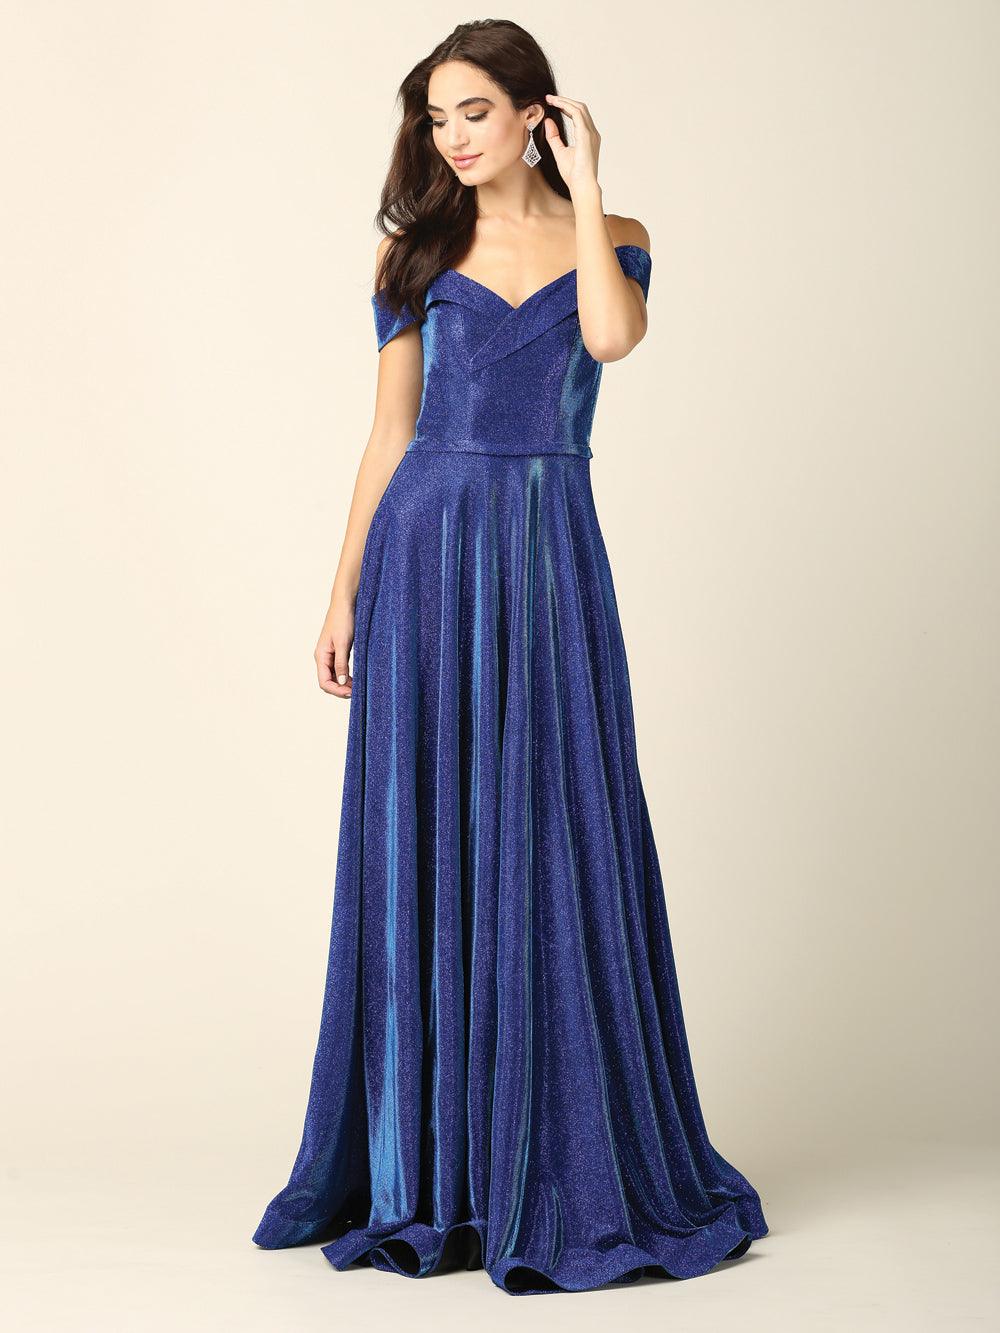 Long Formal Off Shoulder Glitter Ball Gown - The Dress Outlet